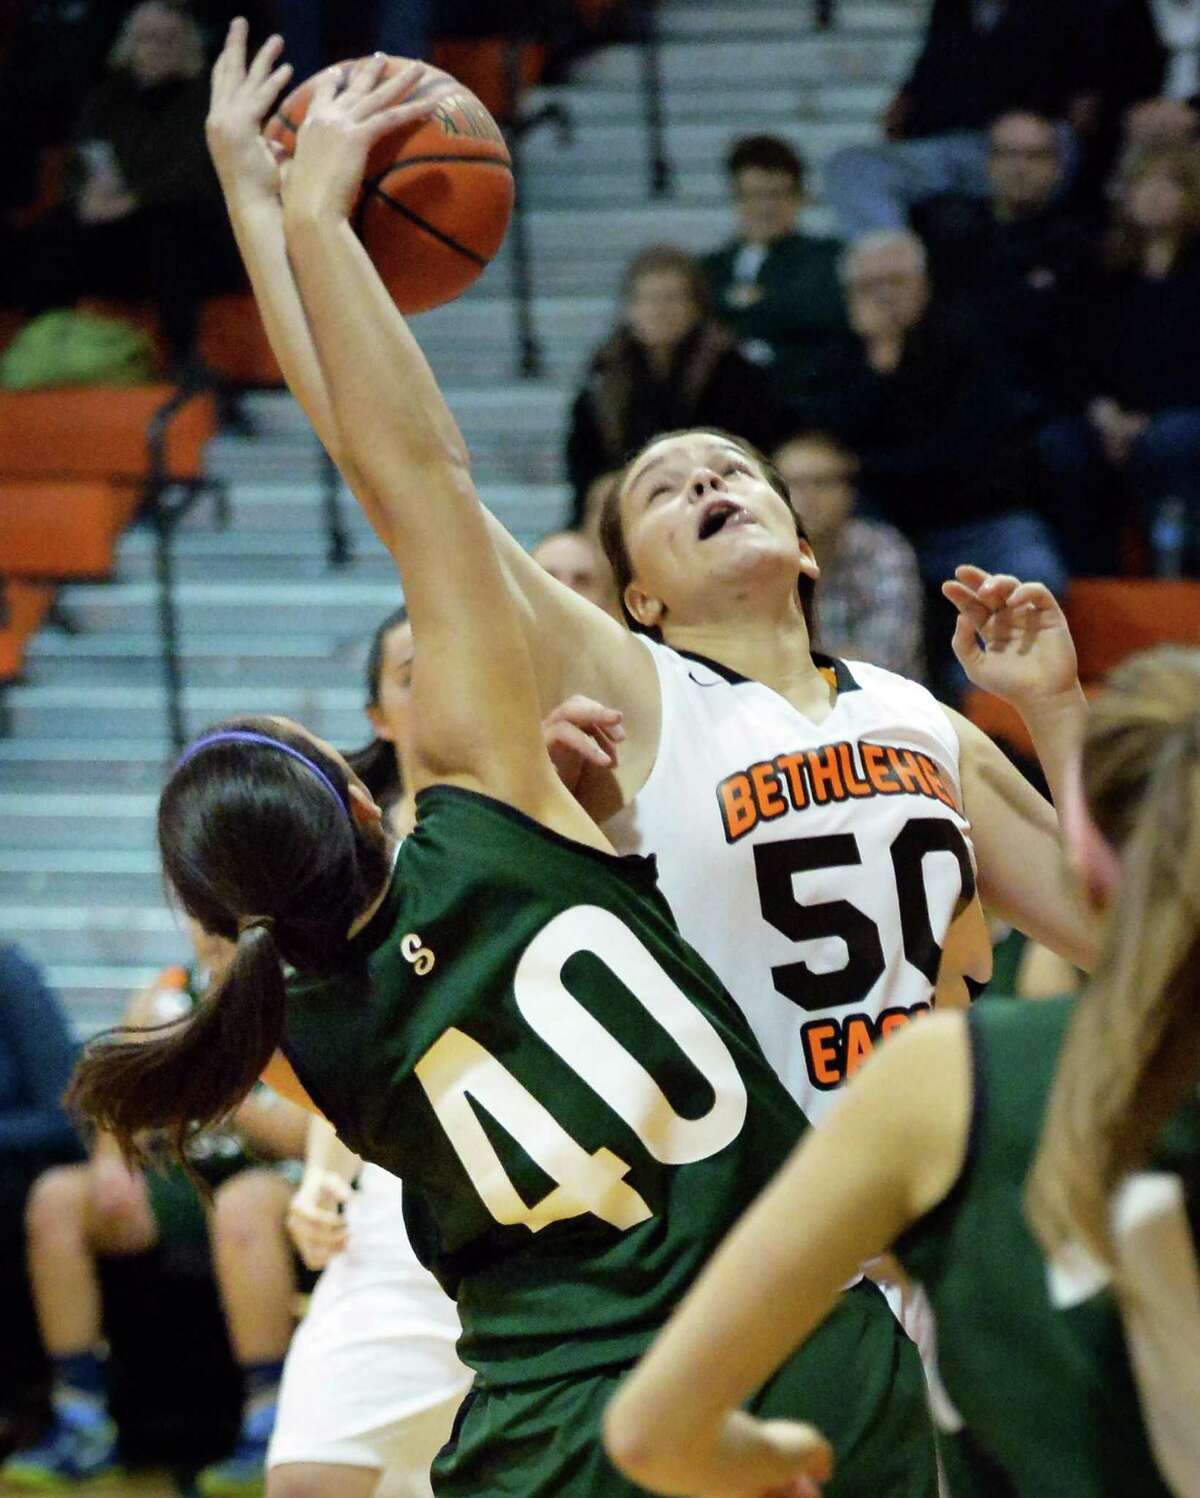 Bethlehem's #50 Erin O'Donnell, right, and Shen's #40 Victoria Pardi fight for a rebound during Friday's game at Bethlehem High Dec. 12, 2014, in Delmar, NY. (John Carl D'Annibale / Times Union)